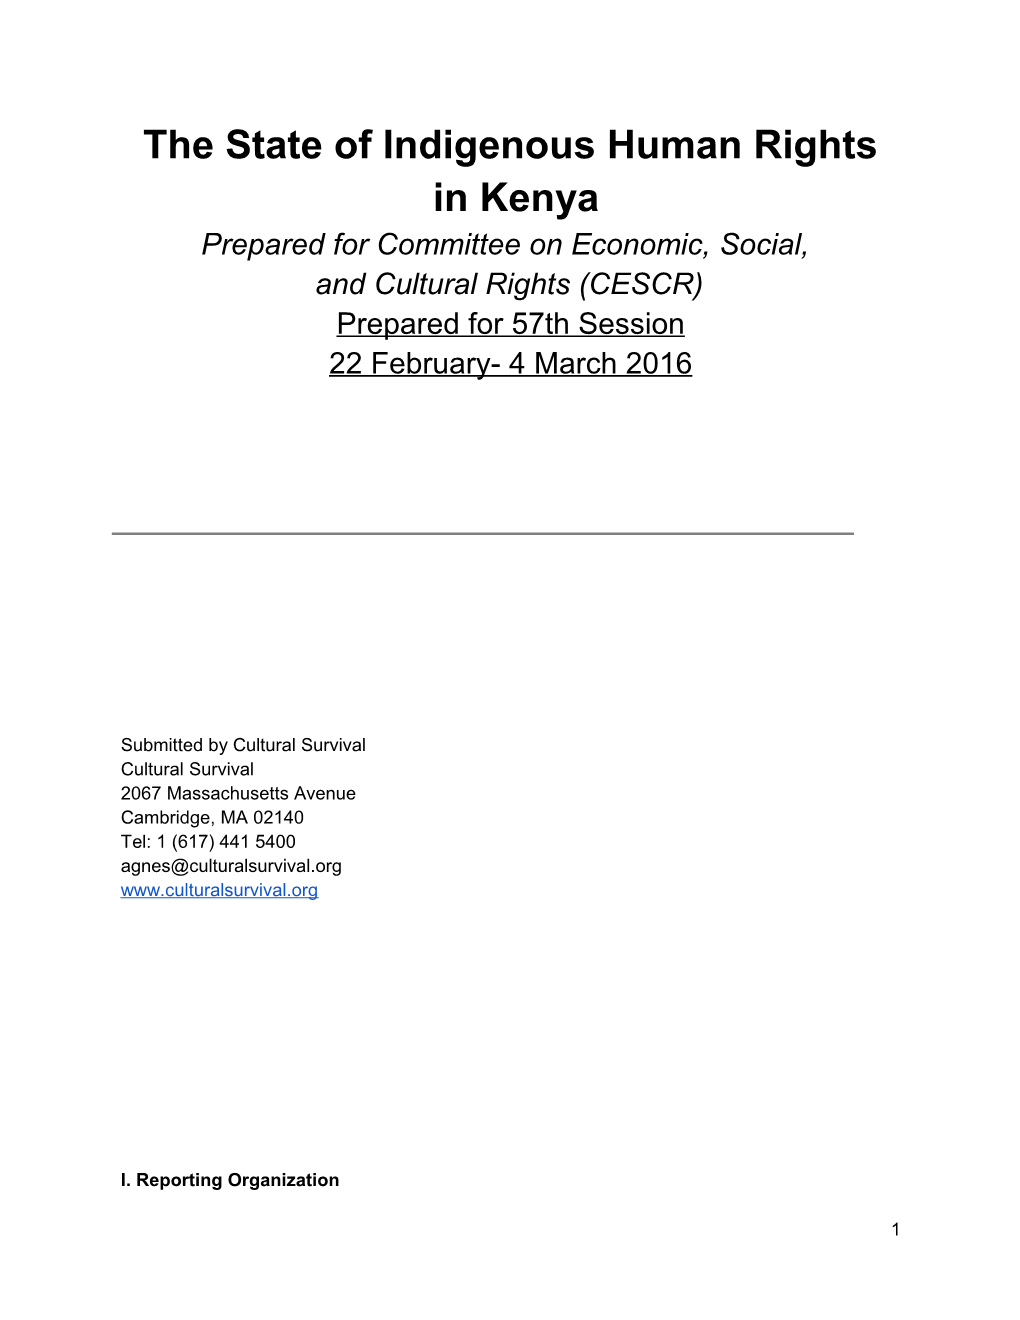 The State of Indigenous Human Rights in Kenya